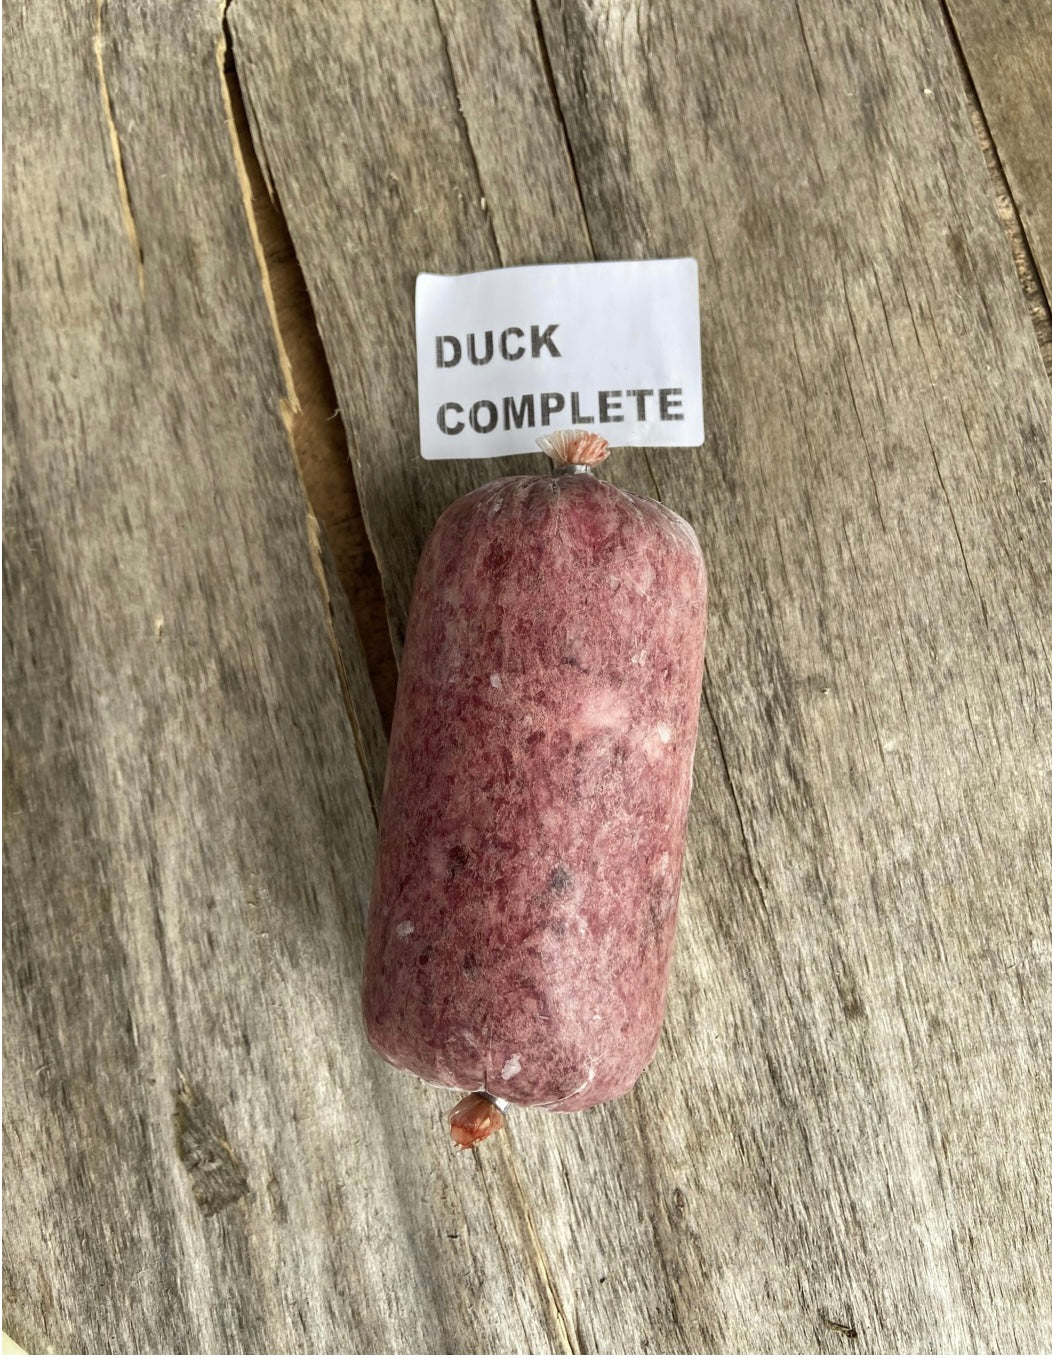 Duck complete raw mince